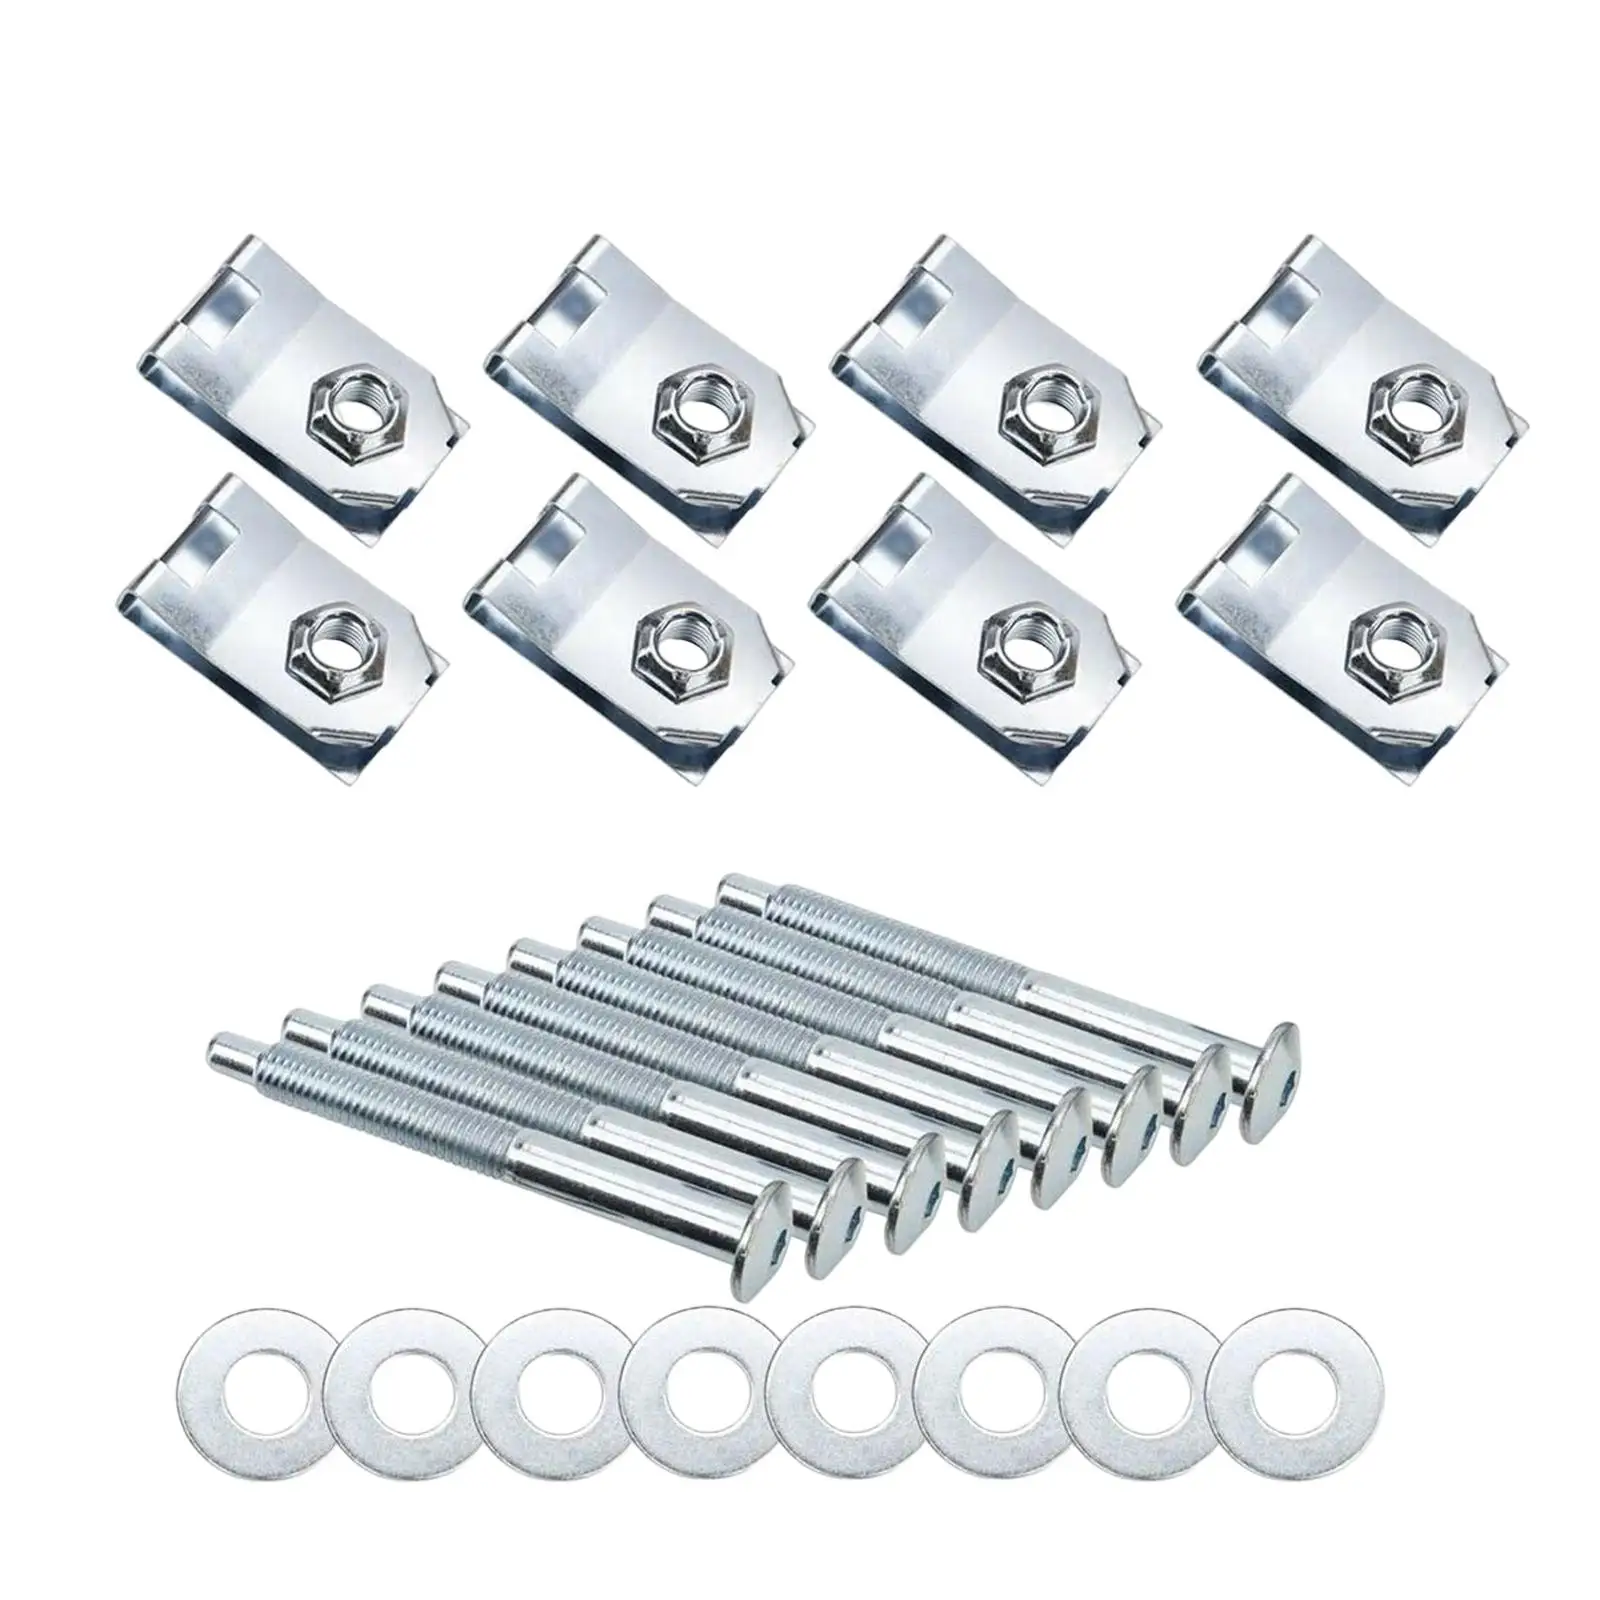 Truck Bed Mounting Bolt Kit Replace Parts for Ford Super Duty F250 F550 Accessories